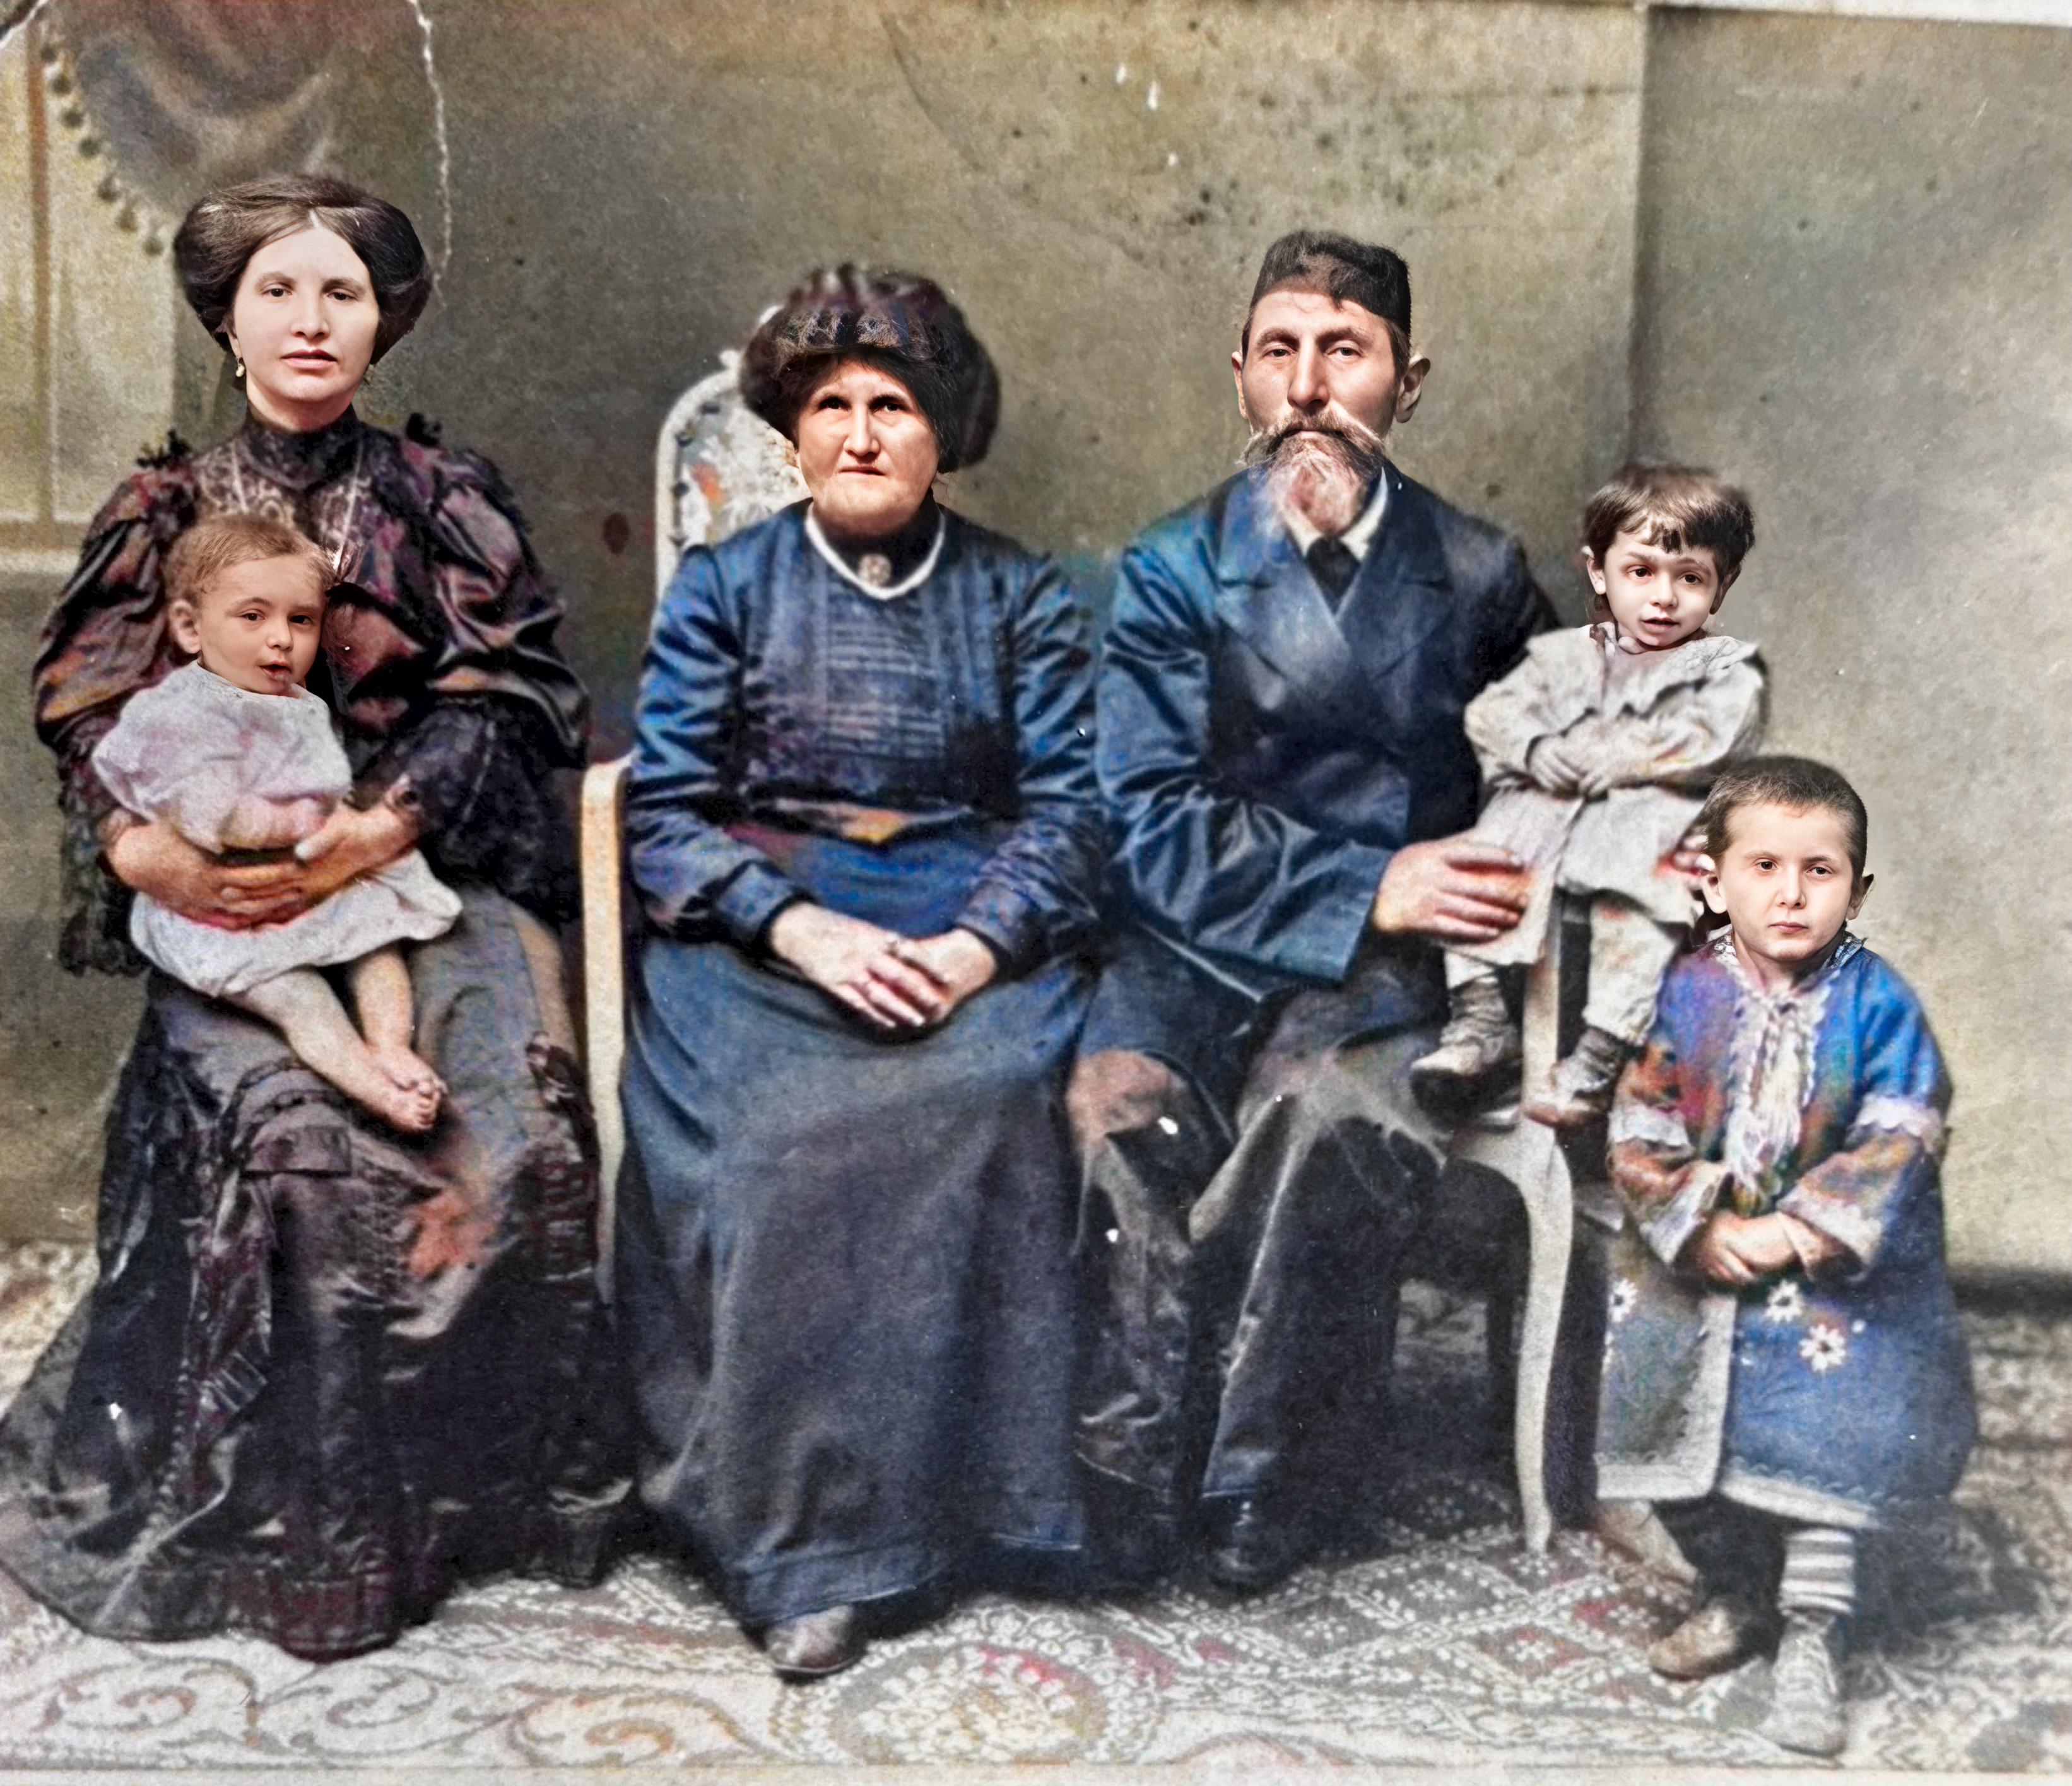 Family in Poland before emigrating to the US. (1900)